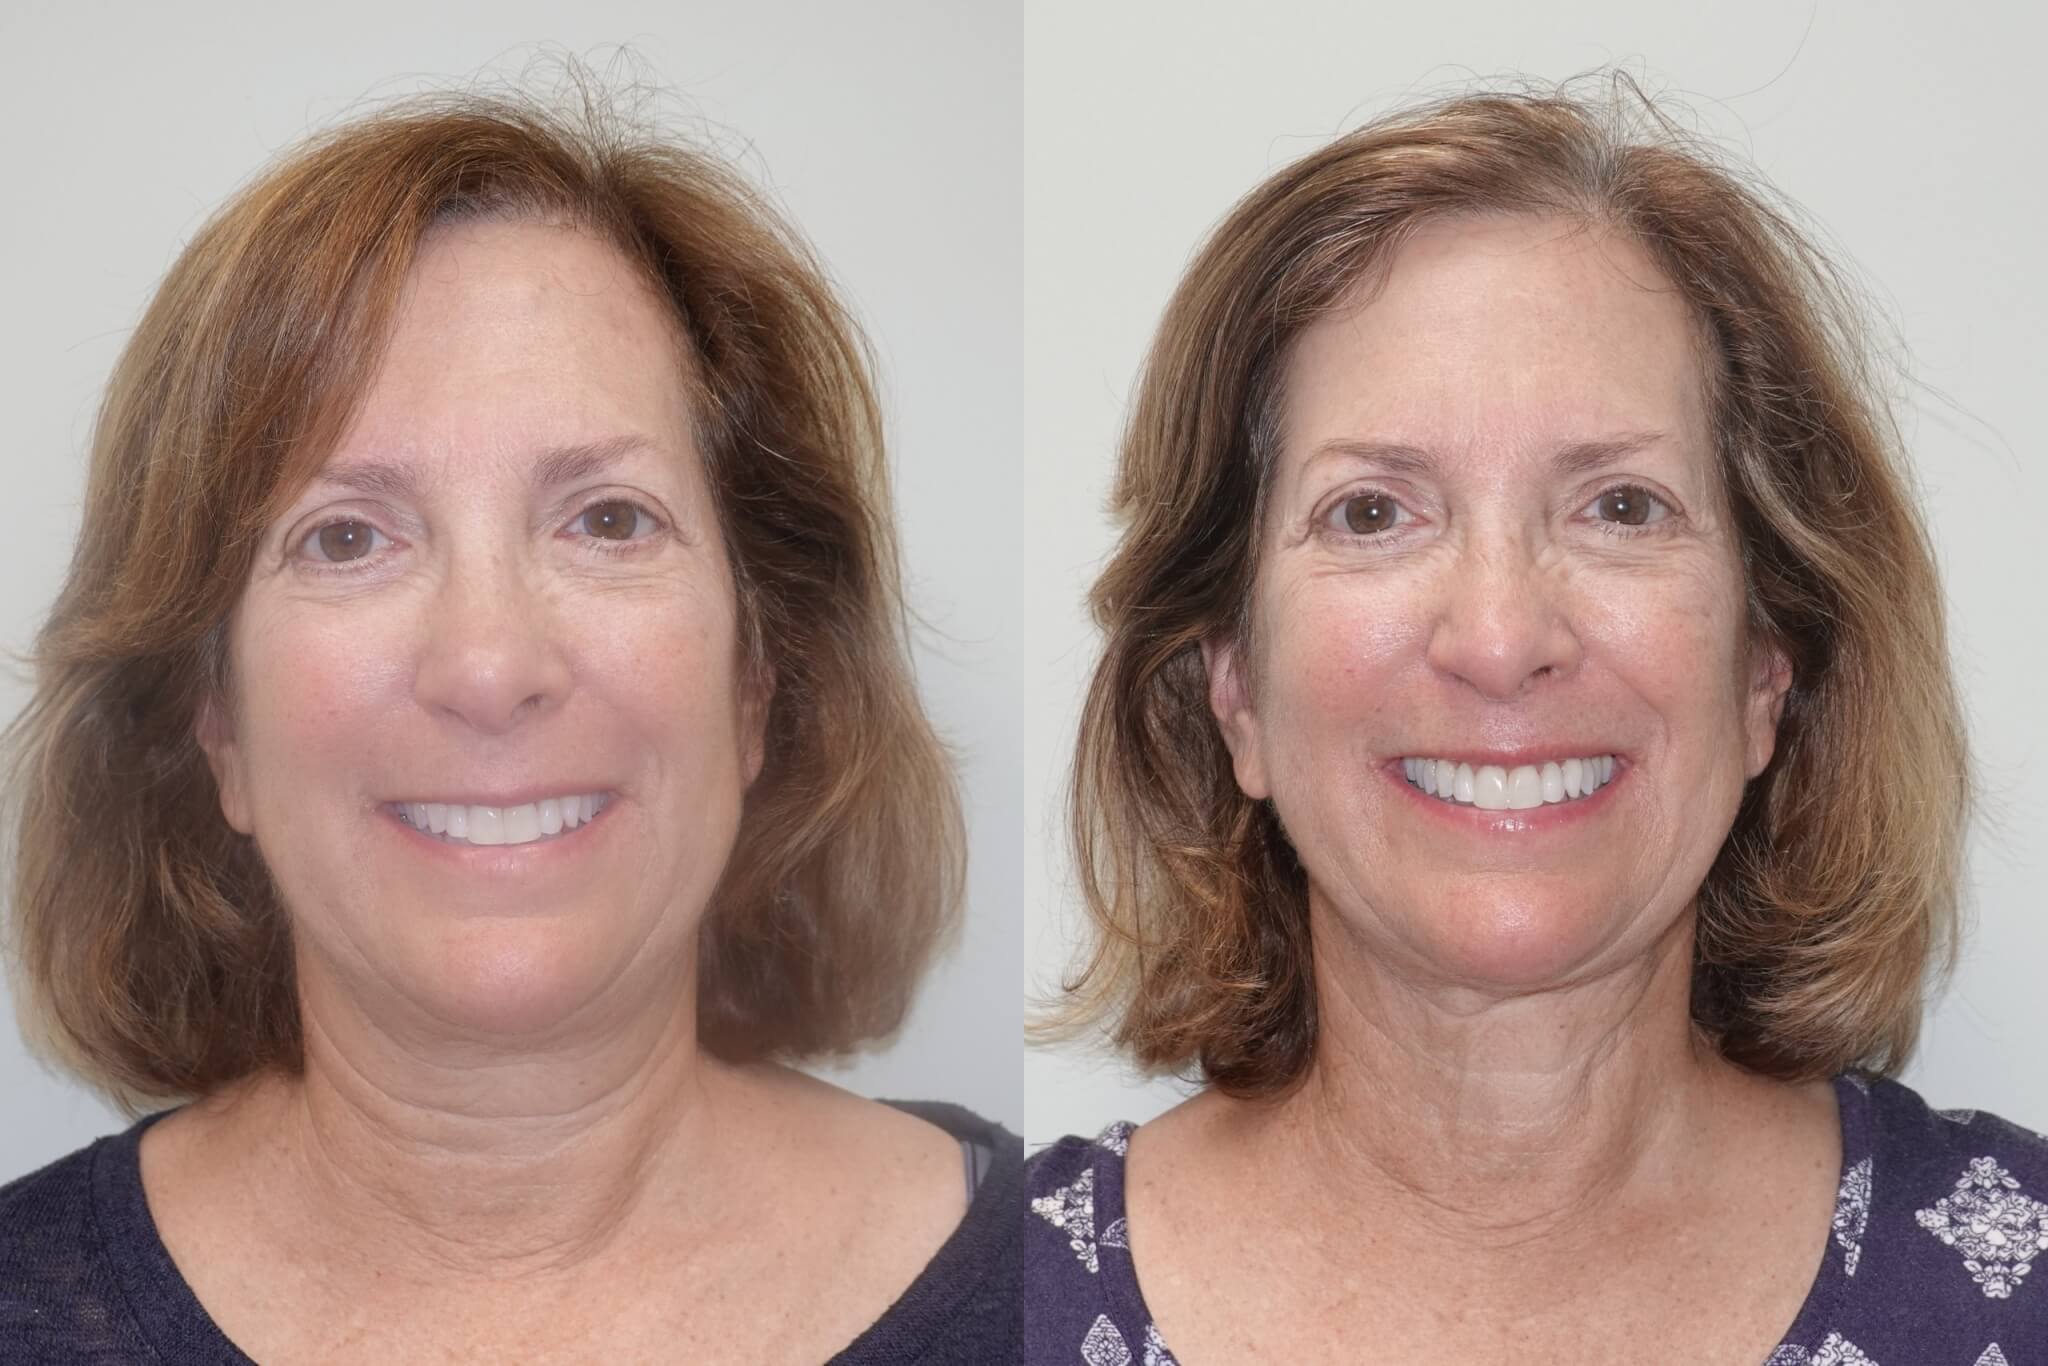 Before and after 6-months liposuction of the lower face and neck and Renuvion